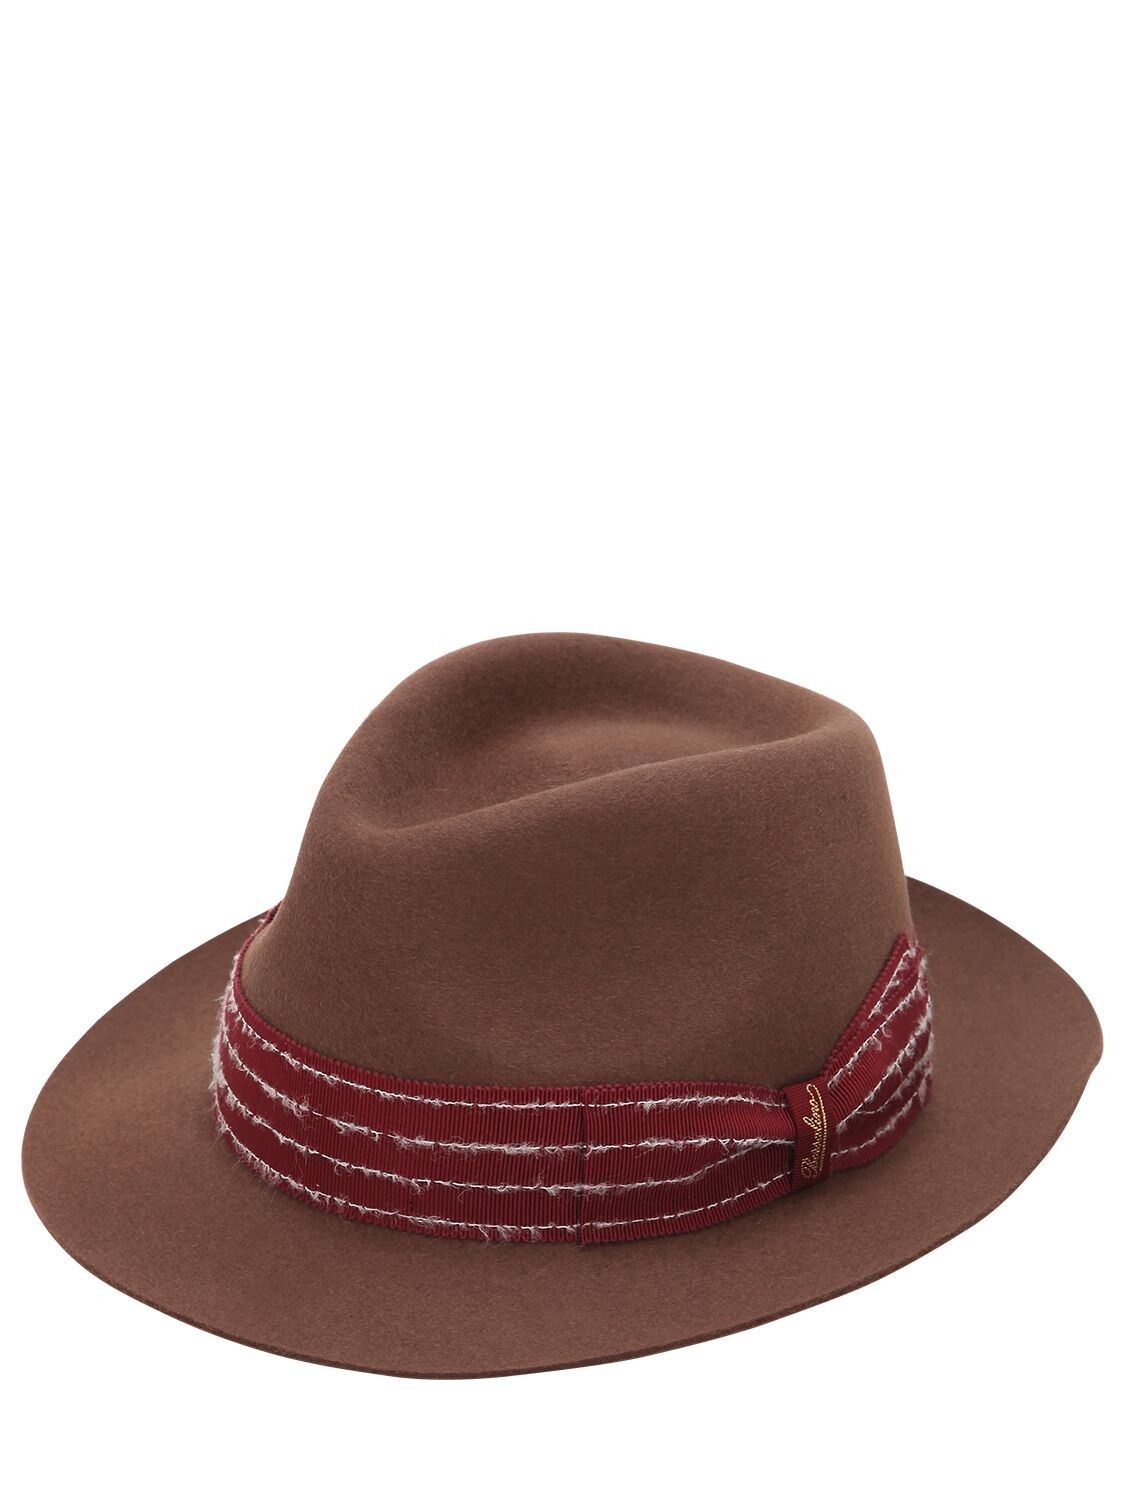 Borsalino Fur Felt Hat W/ Embroidered Hat Band In Brown